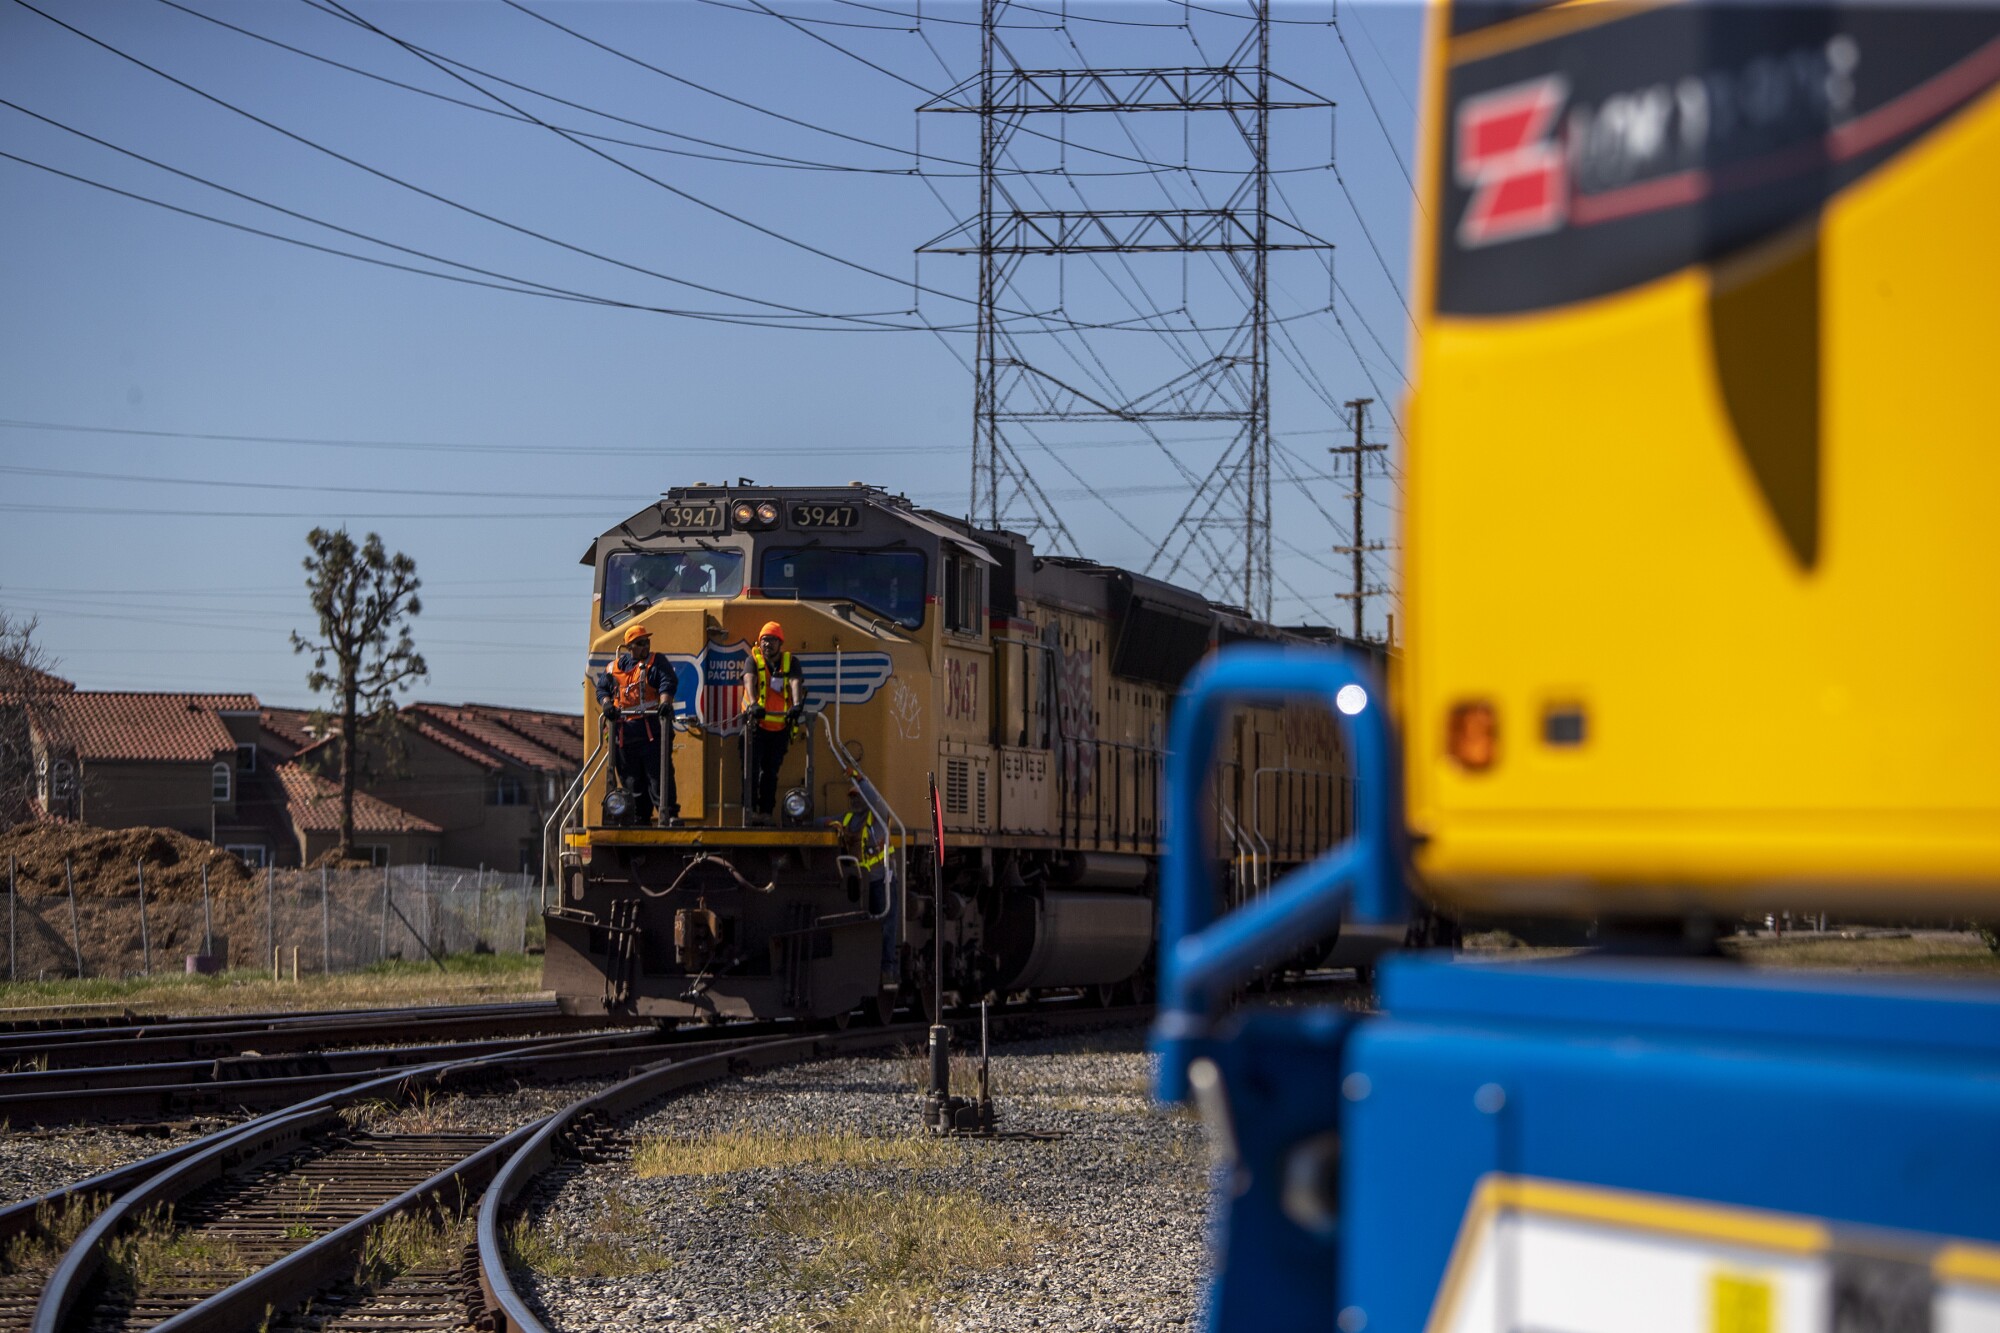 A yellow locomotive rounds a curve.